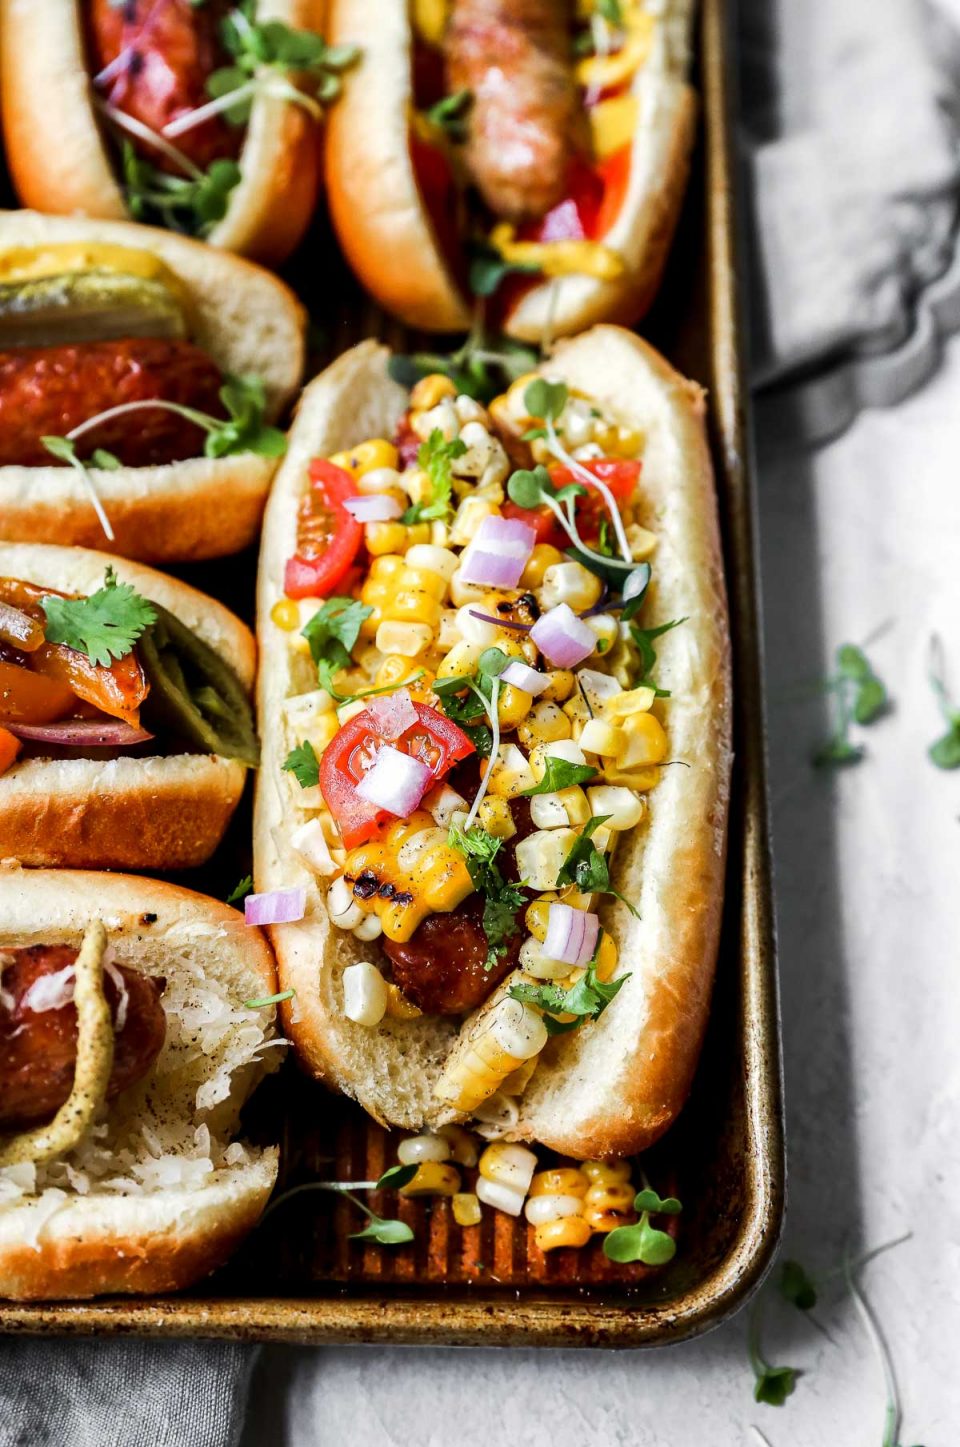 Grilled sausage on a small baking sheet, served on a bun & topped with a fresh corn salad. The baking sheet is on a white surface, sitting atop a grey linen napkin. 